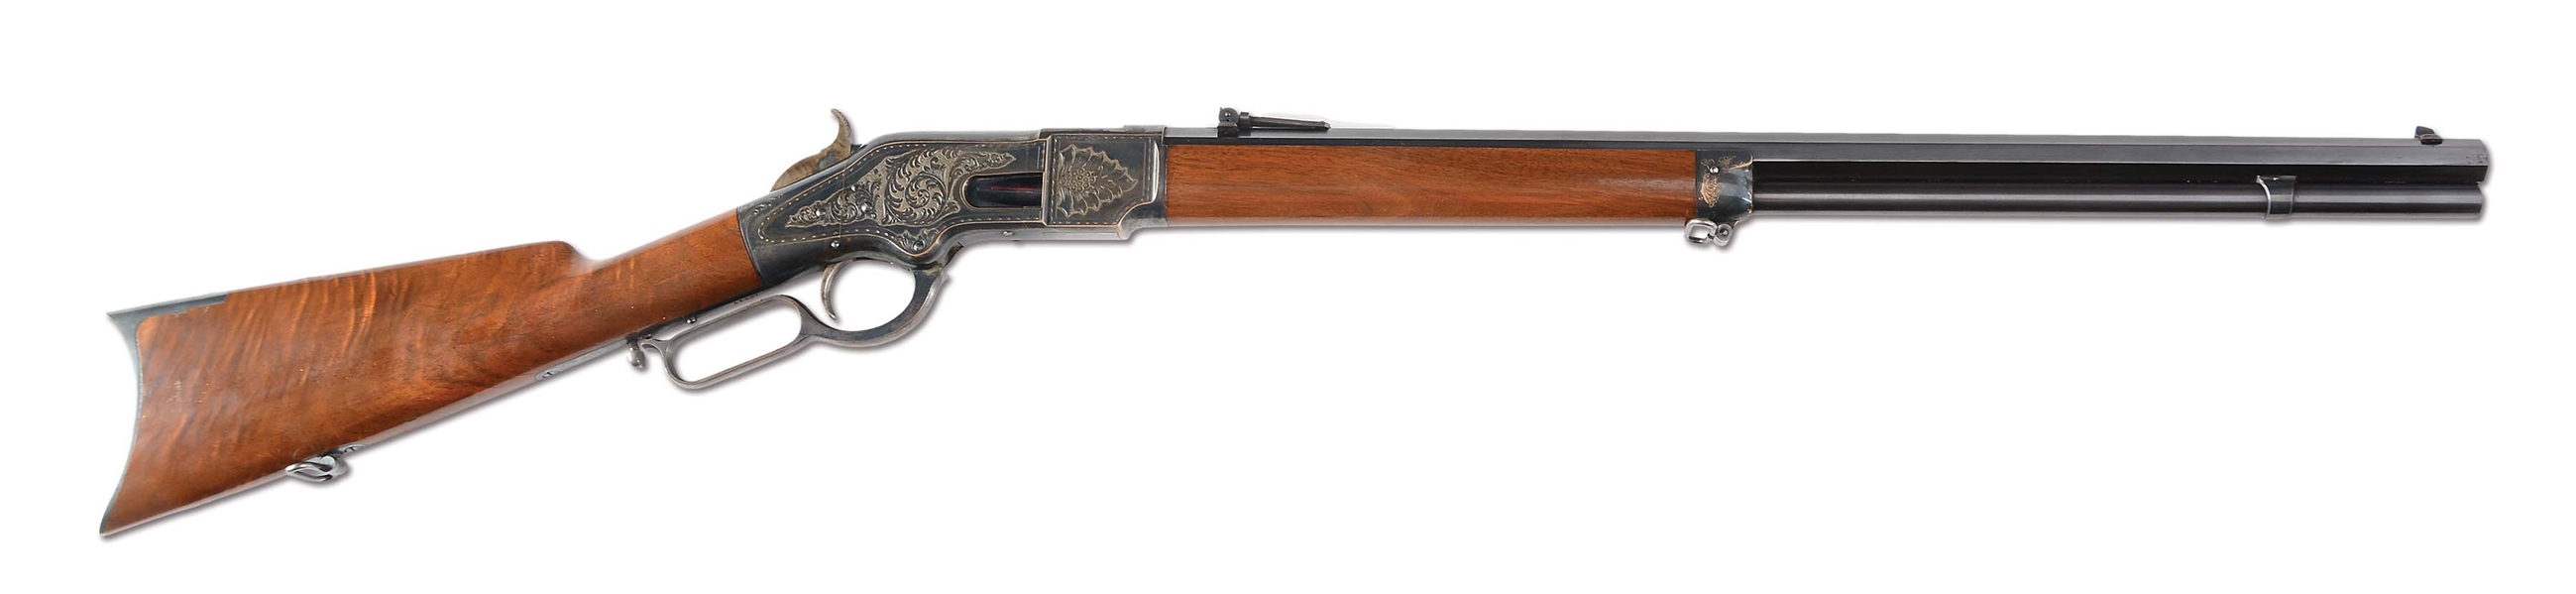 (A) SPECTACULAR CONDITION ENGRAVED AND SILVER-PLATED HENRY MARKED WINCHESTER MODEL 1866 RIFLE WITH SPLENDID 3X STYLE FACTORY DELUXE WALNUT STOCK.